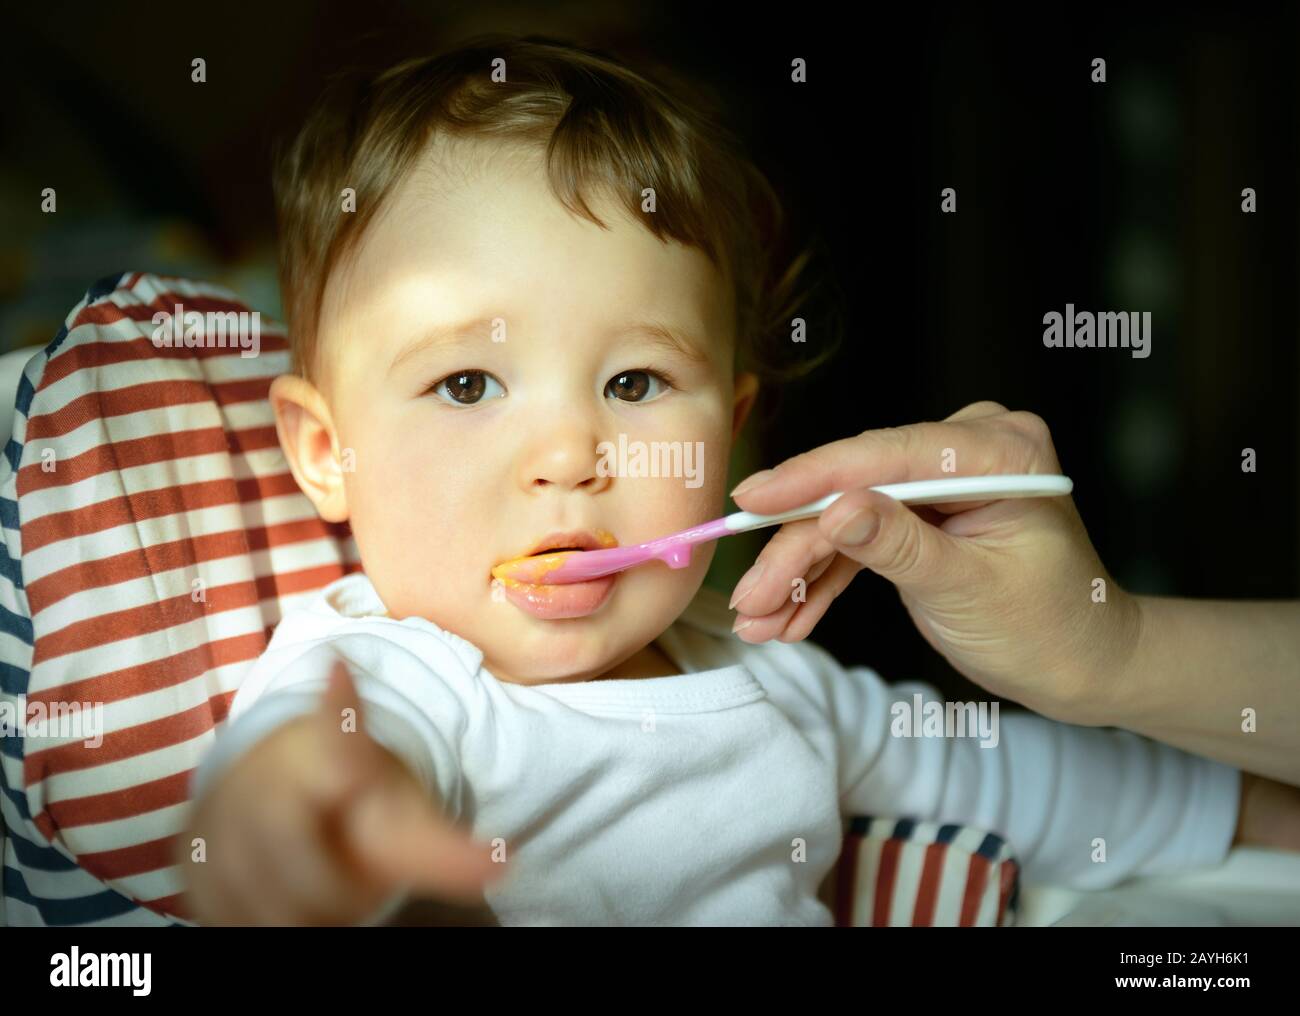 The one-year-old child eats porridge and points his finger at the camera Stock Photo